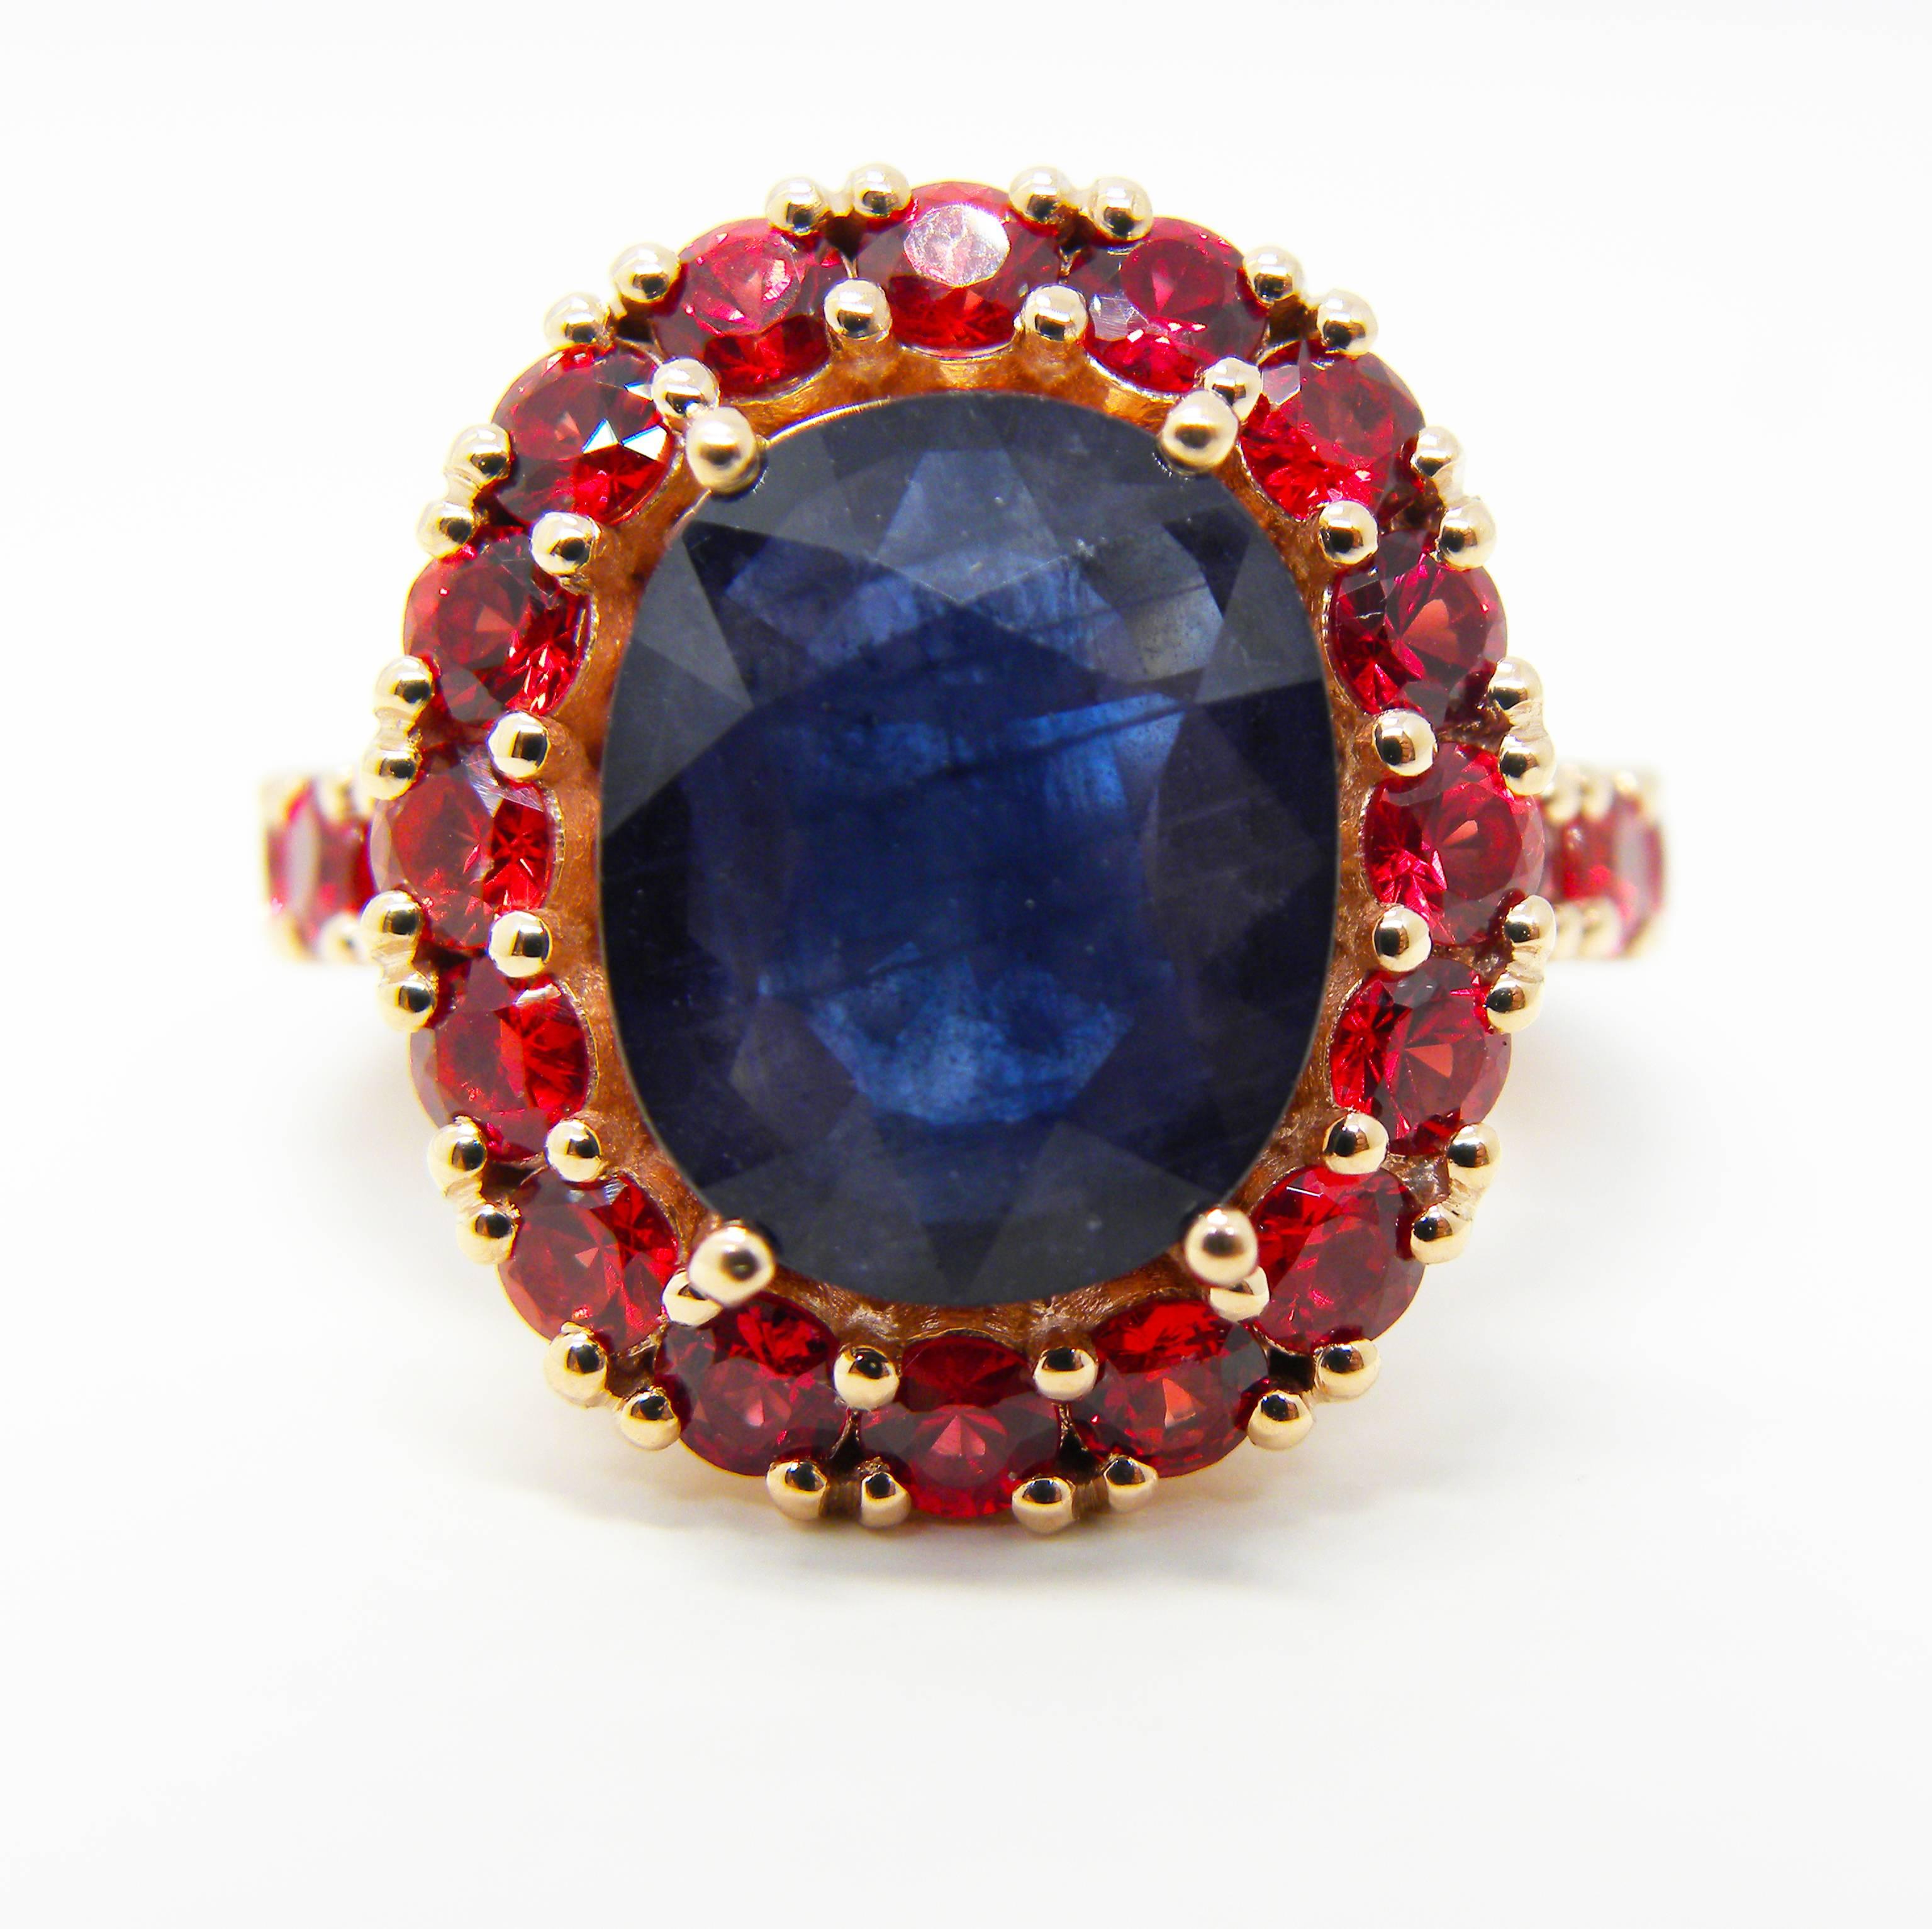 Women's 6.05 Carat Natural Oval Sapphire 3.81 Carat Red Spinel Cocktail Ring